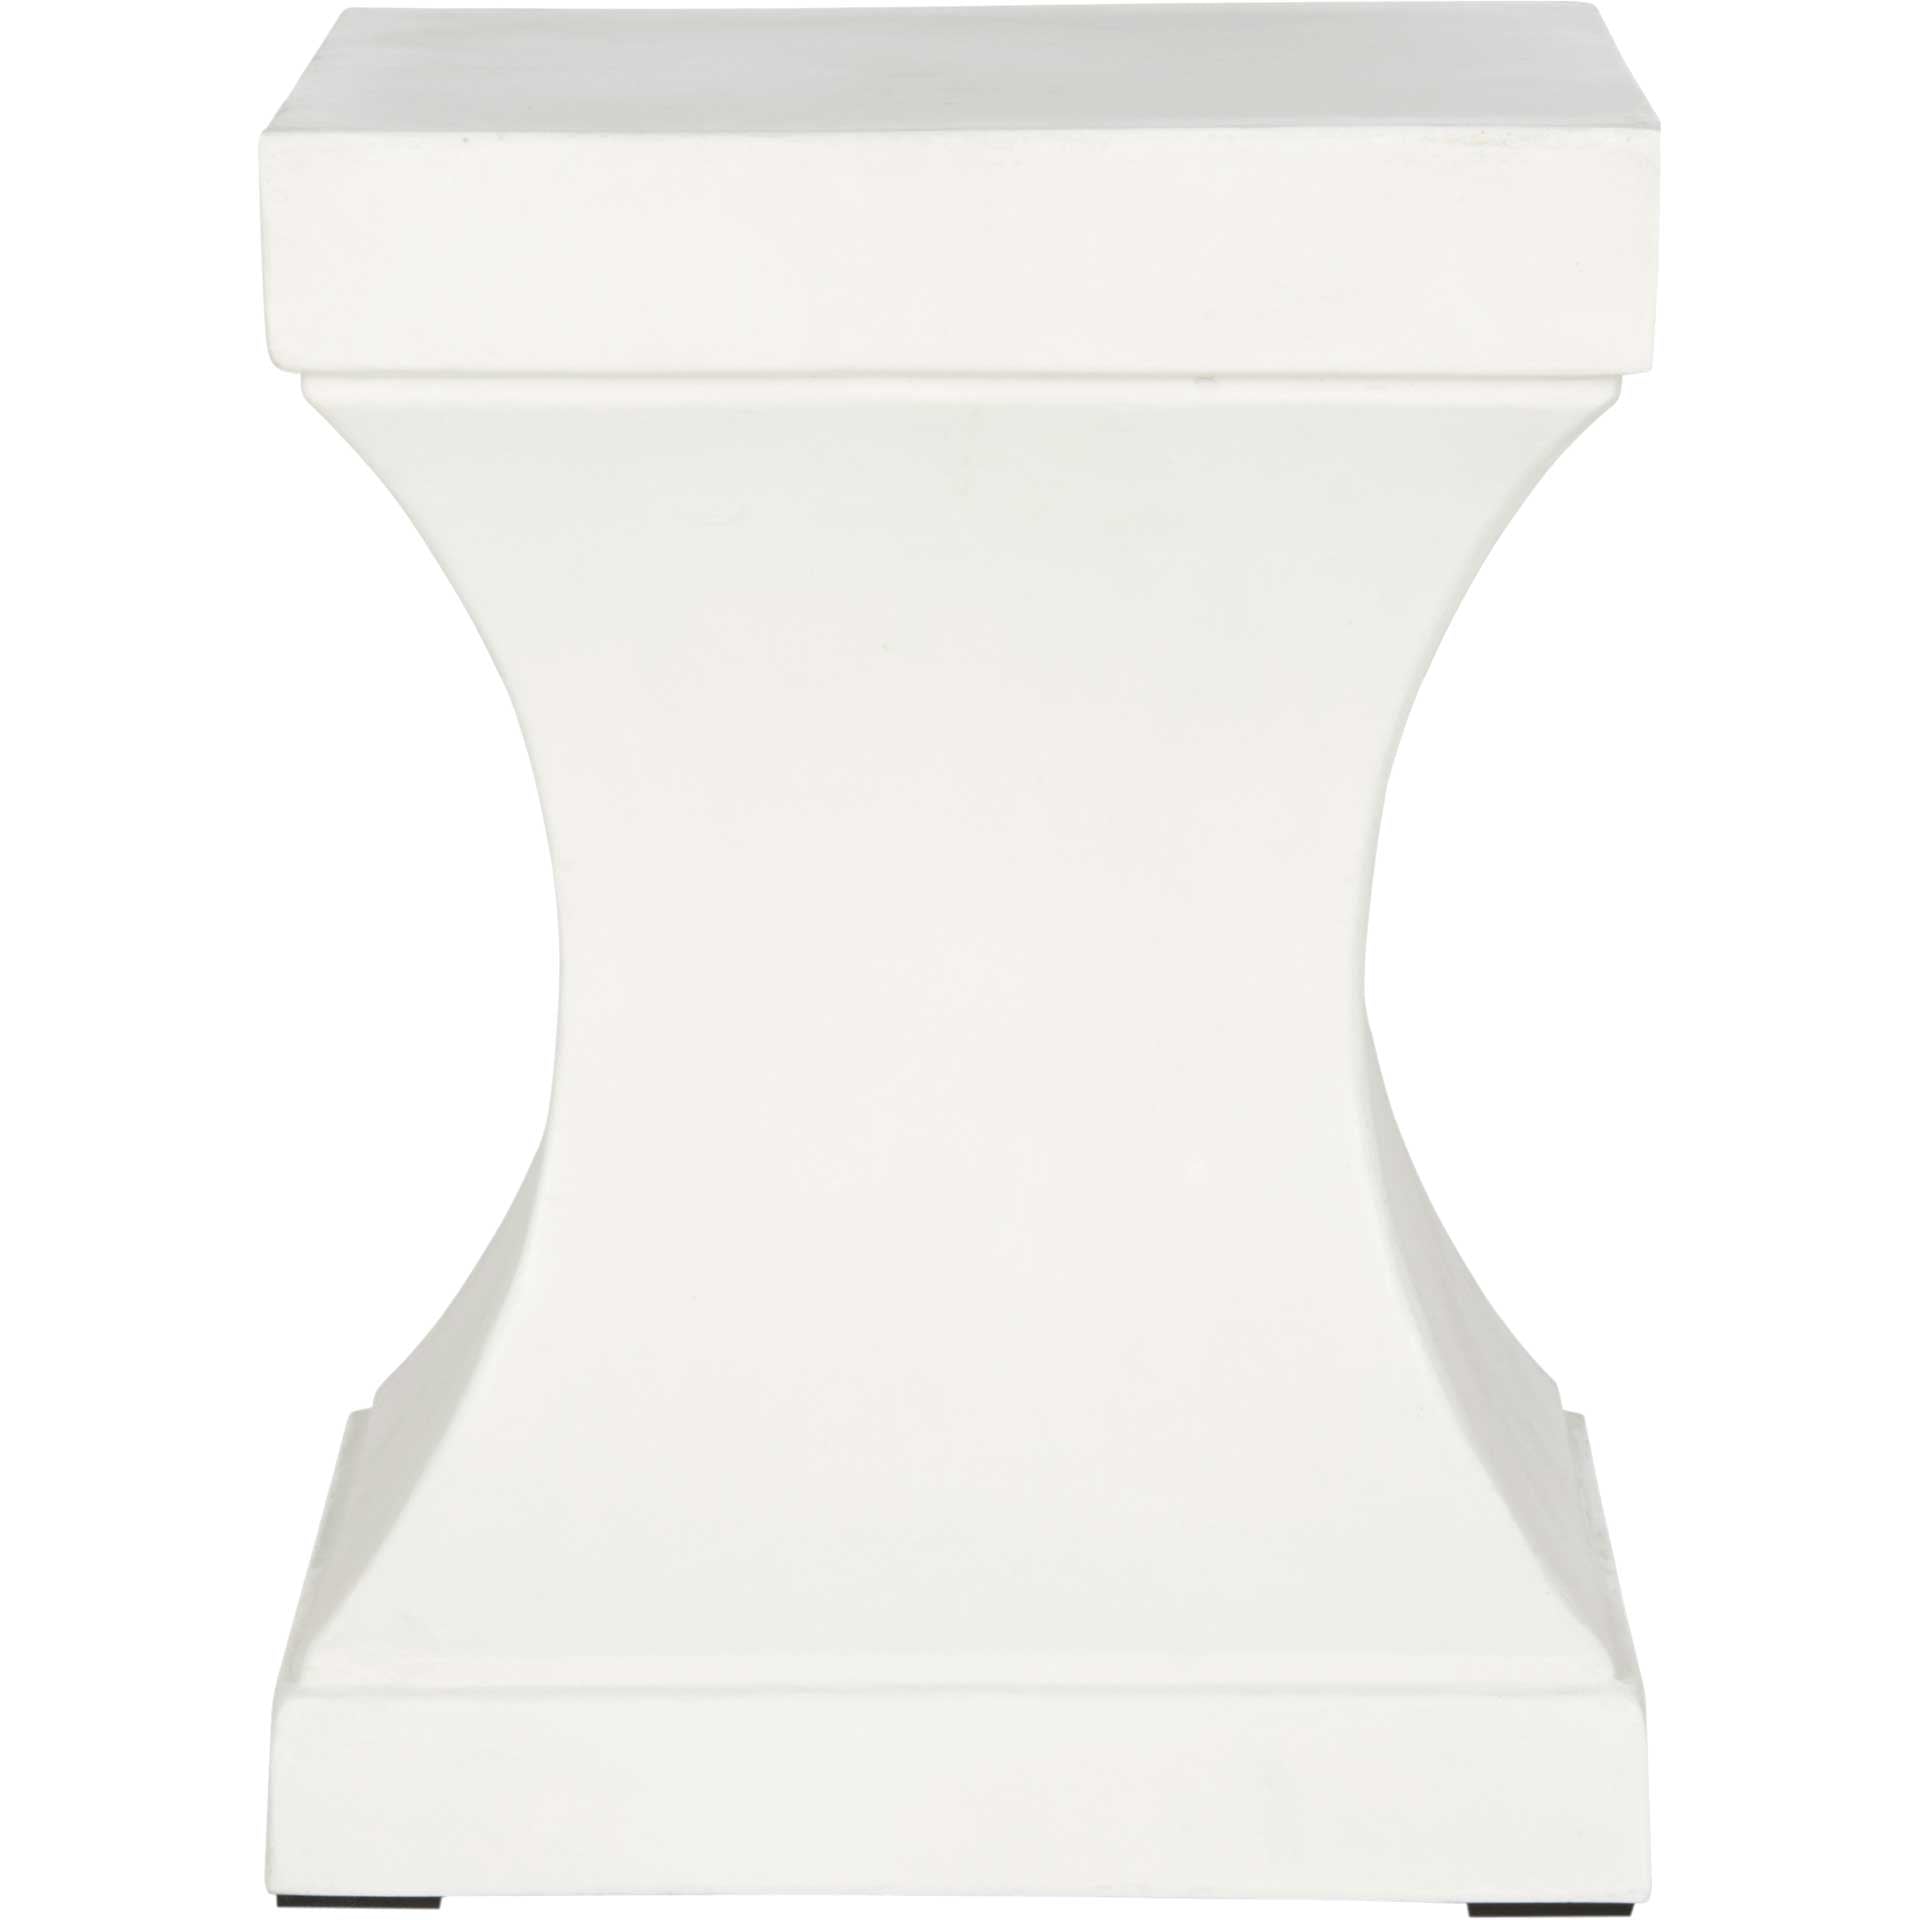 Cuallie Modern Concrete Accent Table Ivory